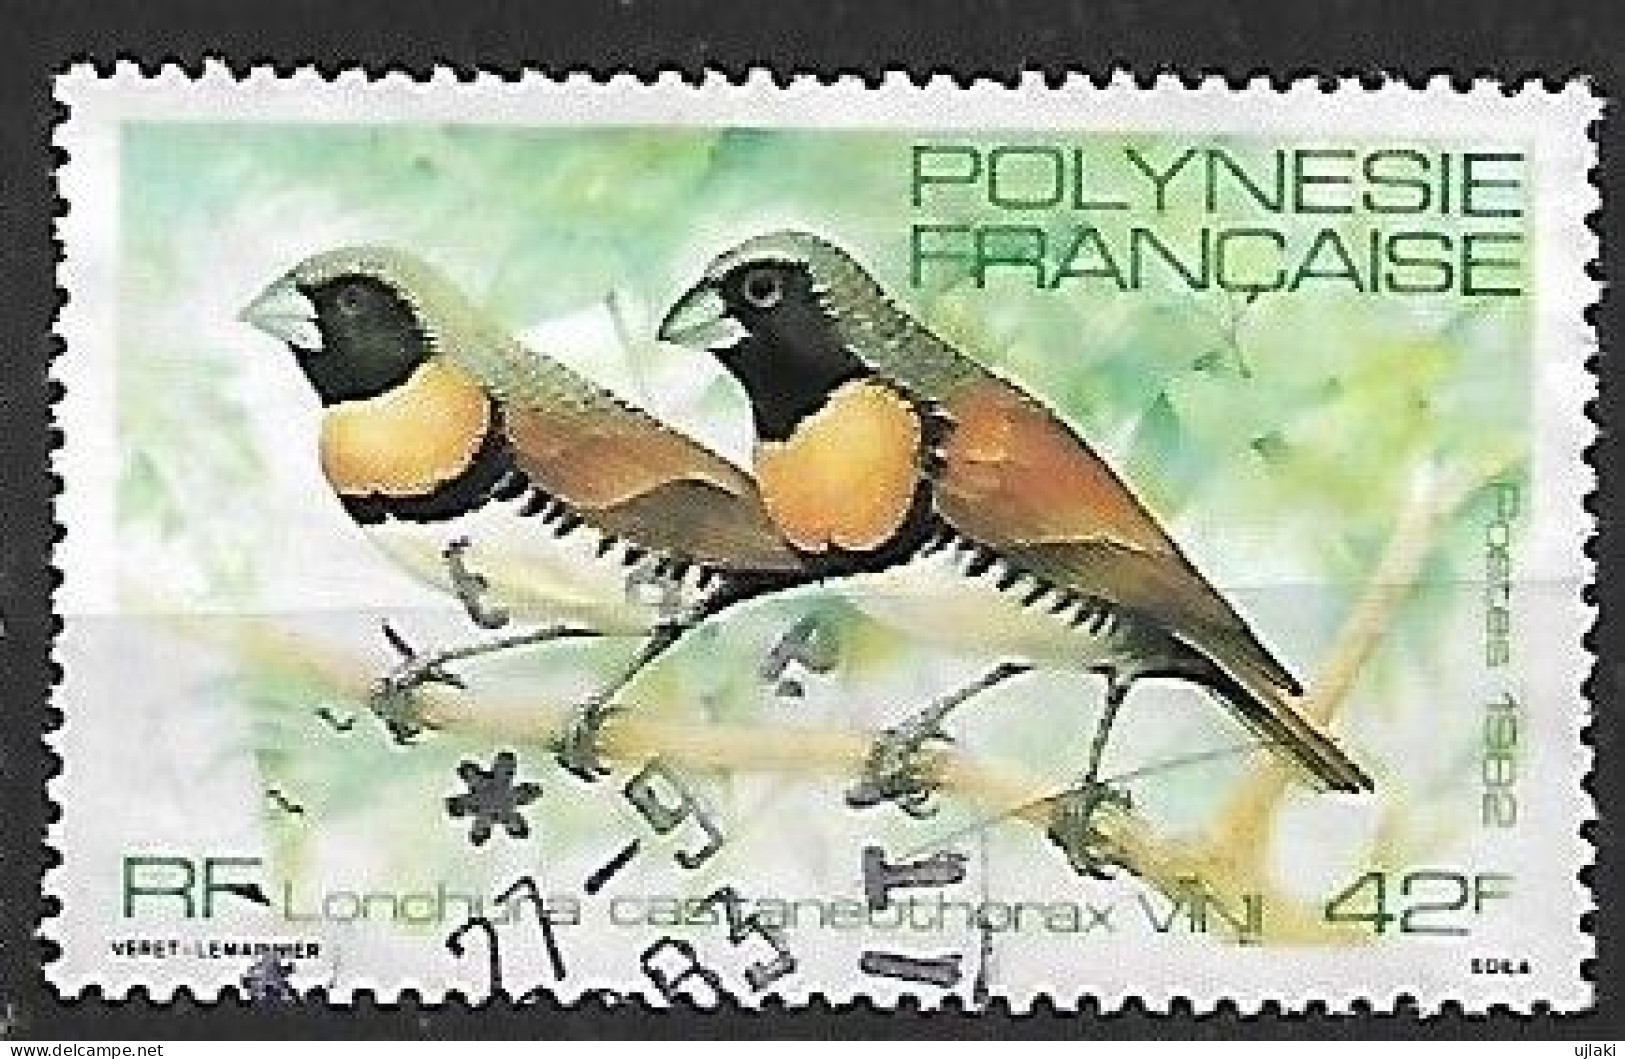 POLYNESIE FRANCAISE: Faune:oiseaux   N°191  Année:1982 - Used Stamps